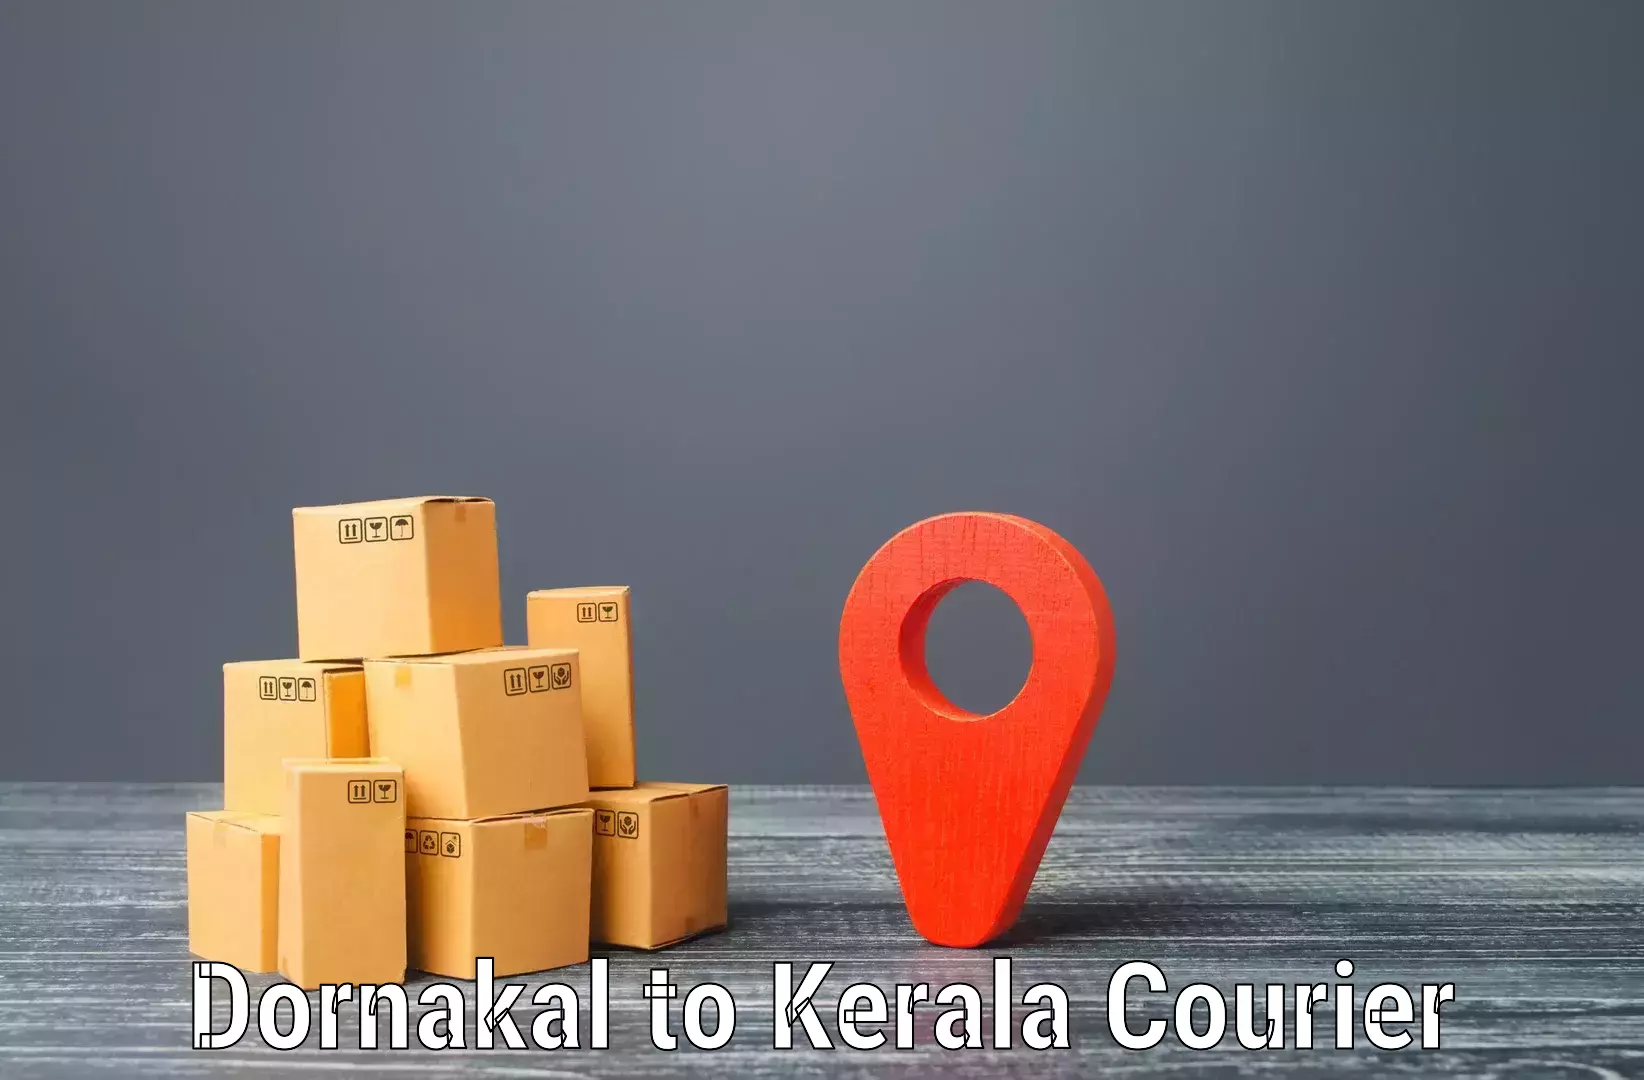 Express courier capabilities in Dornakal to Thrissur